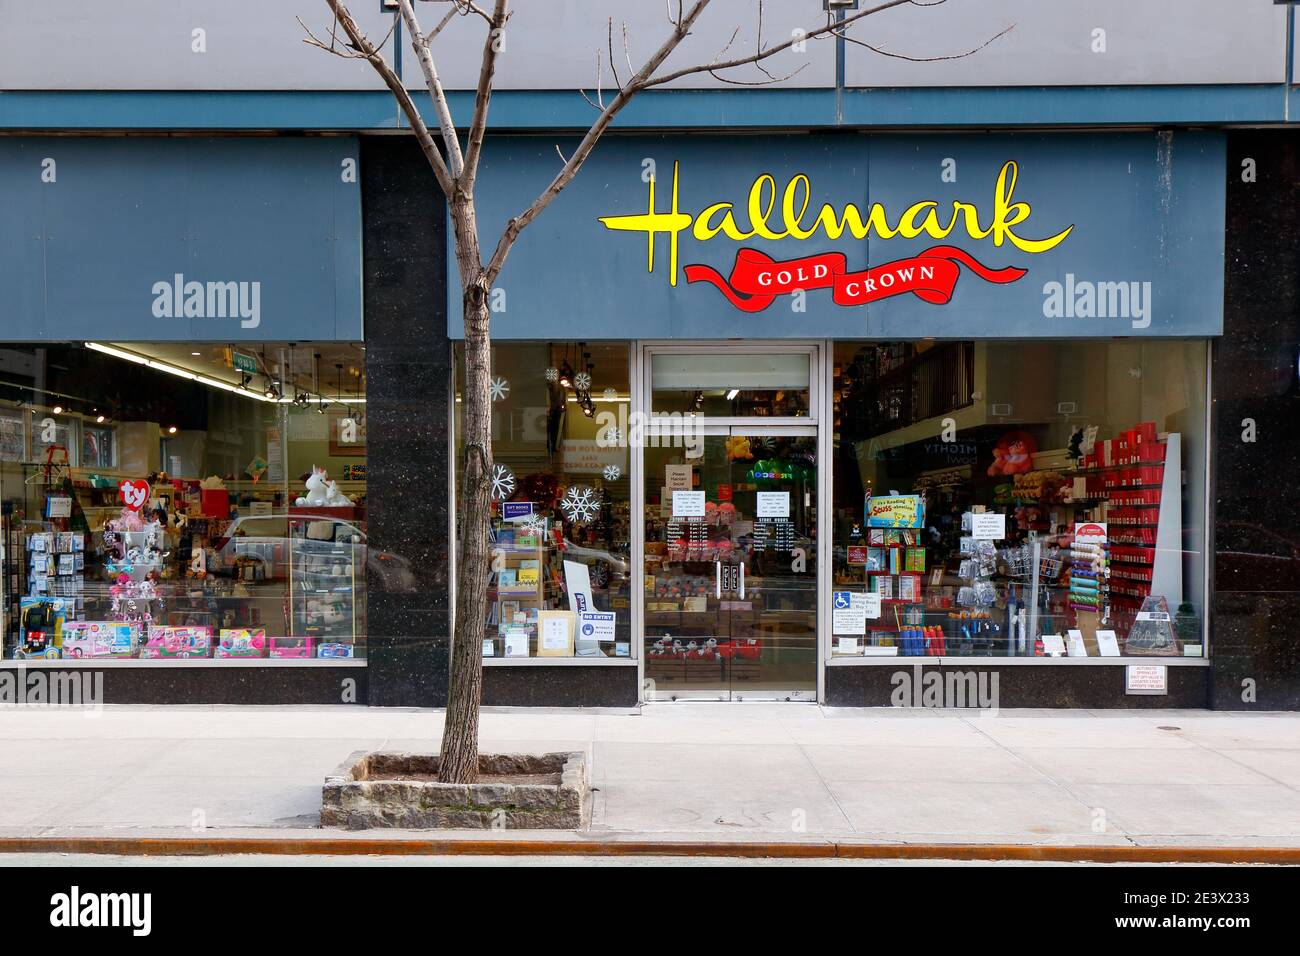 Amreen's Hallmark Gold Crown, 820 2nd Ave, New York, NY. exterior storefront of a greeting card franchise in Midtown Manhattan. Stock Photo